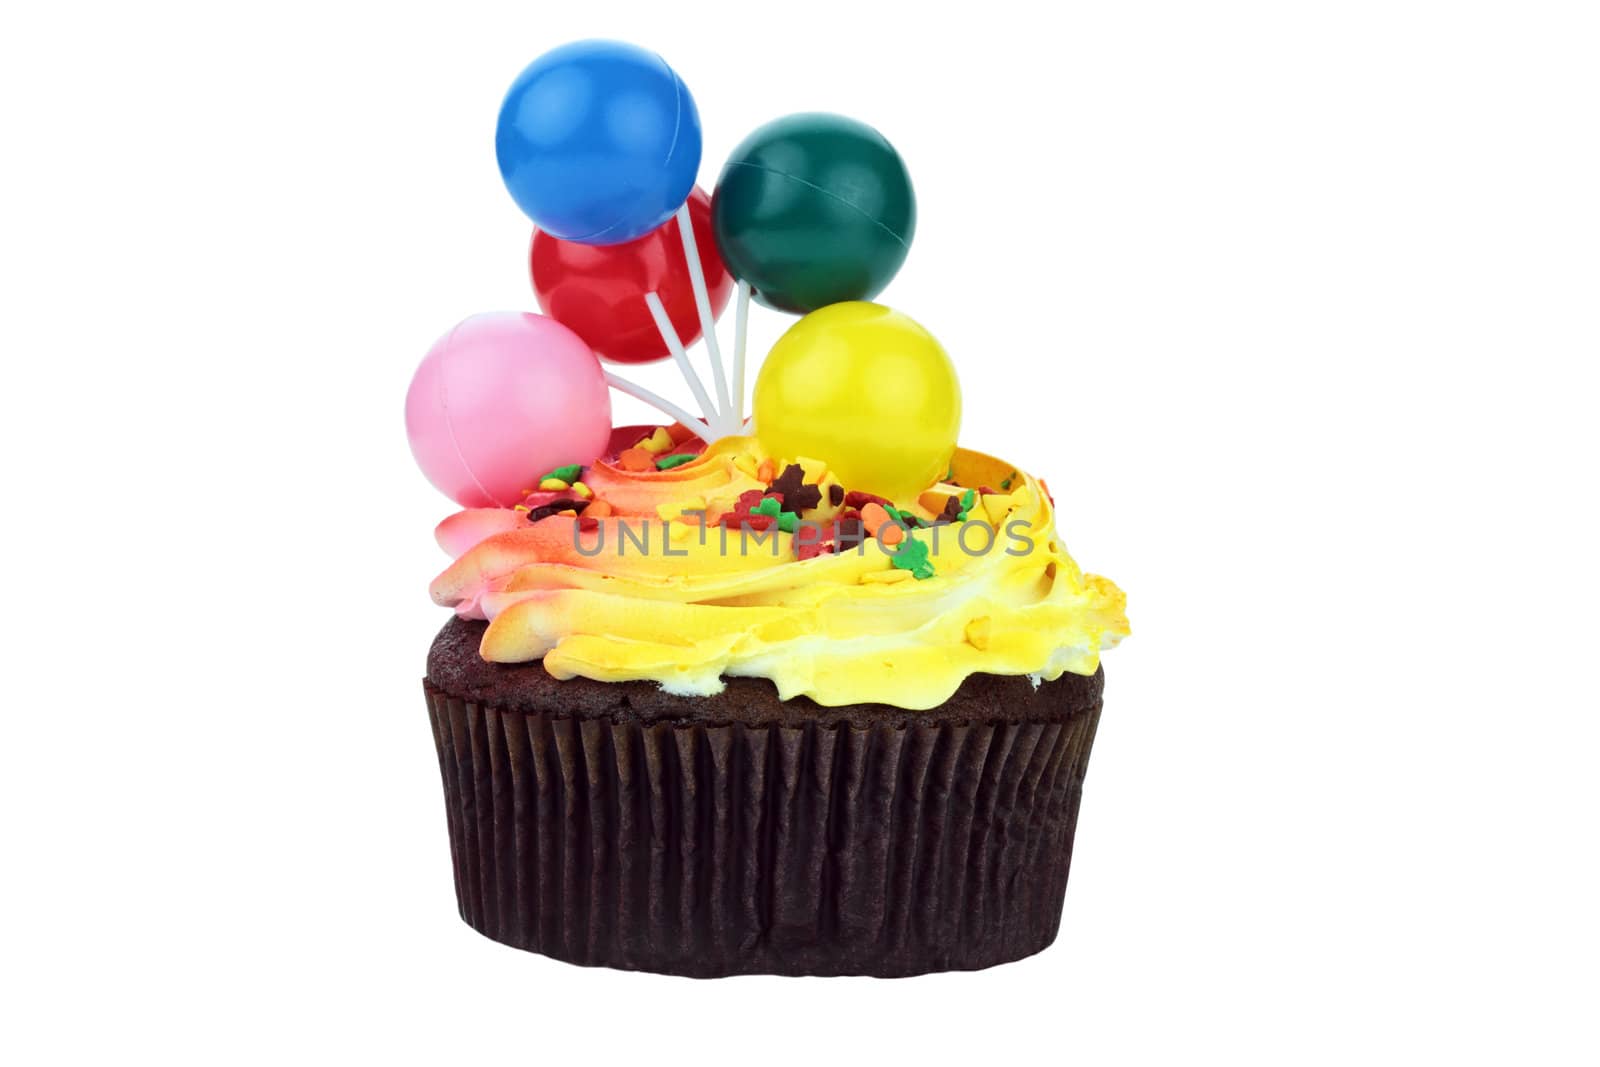 Chocolate birthday cake with plastic balloons. Isolated on a white background.